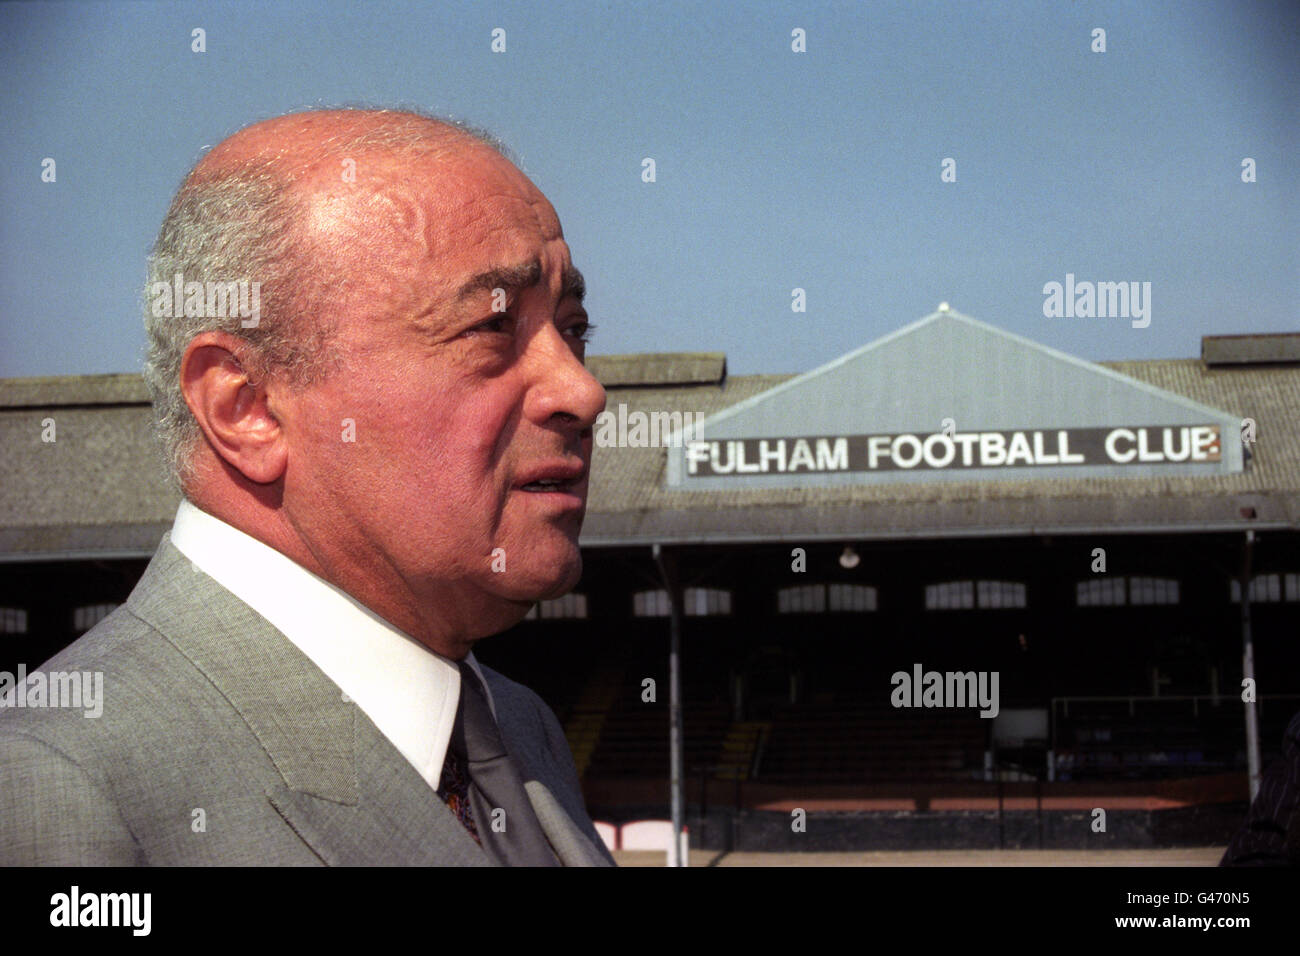 Soccer - Mohamed Al Fayed - Fulham Football Club - Craven Cottage Stock Photo